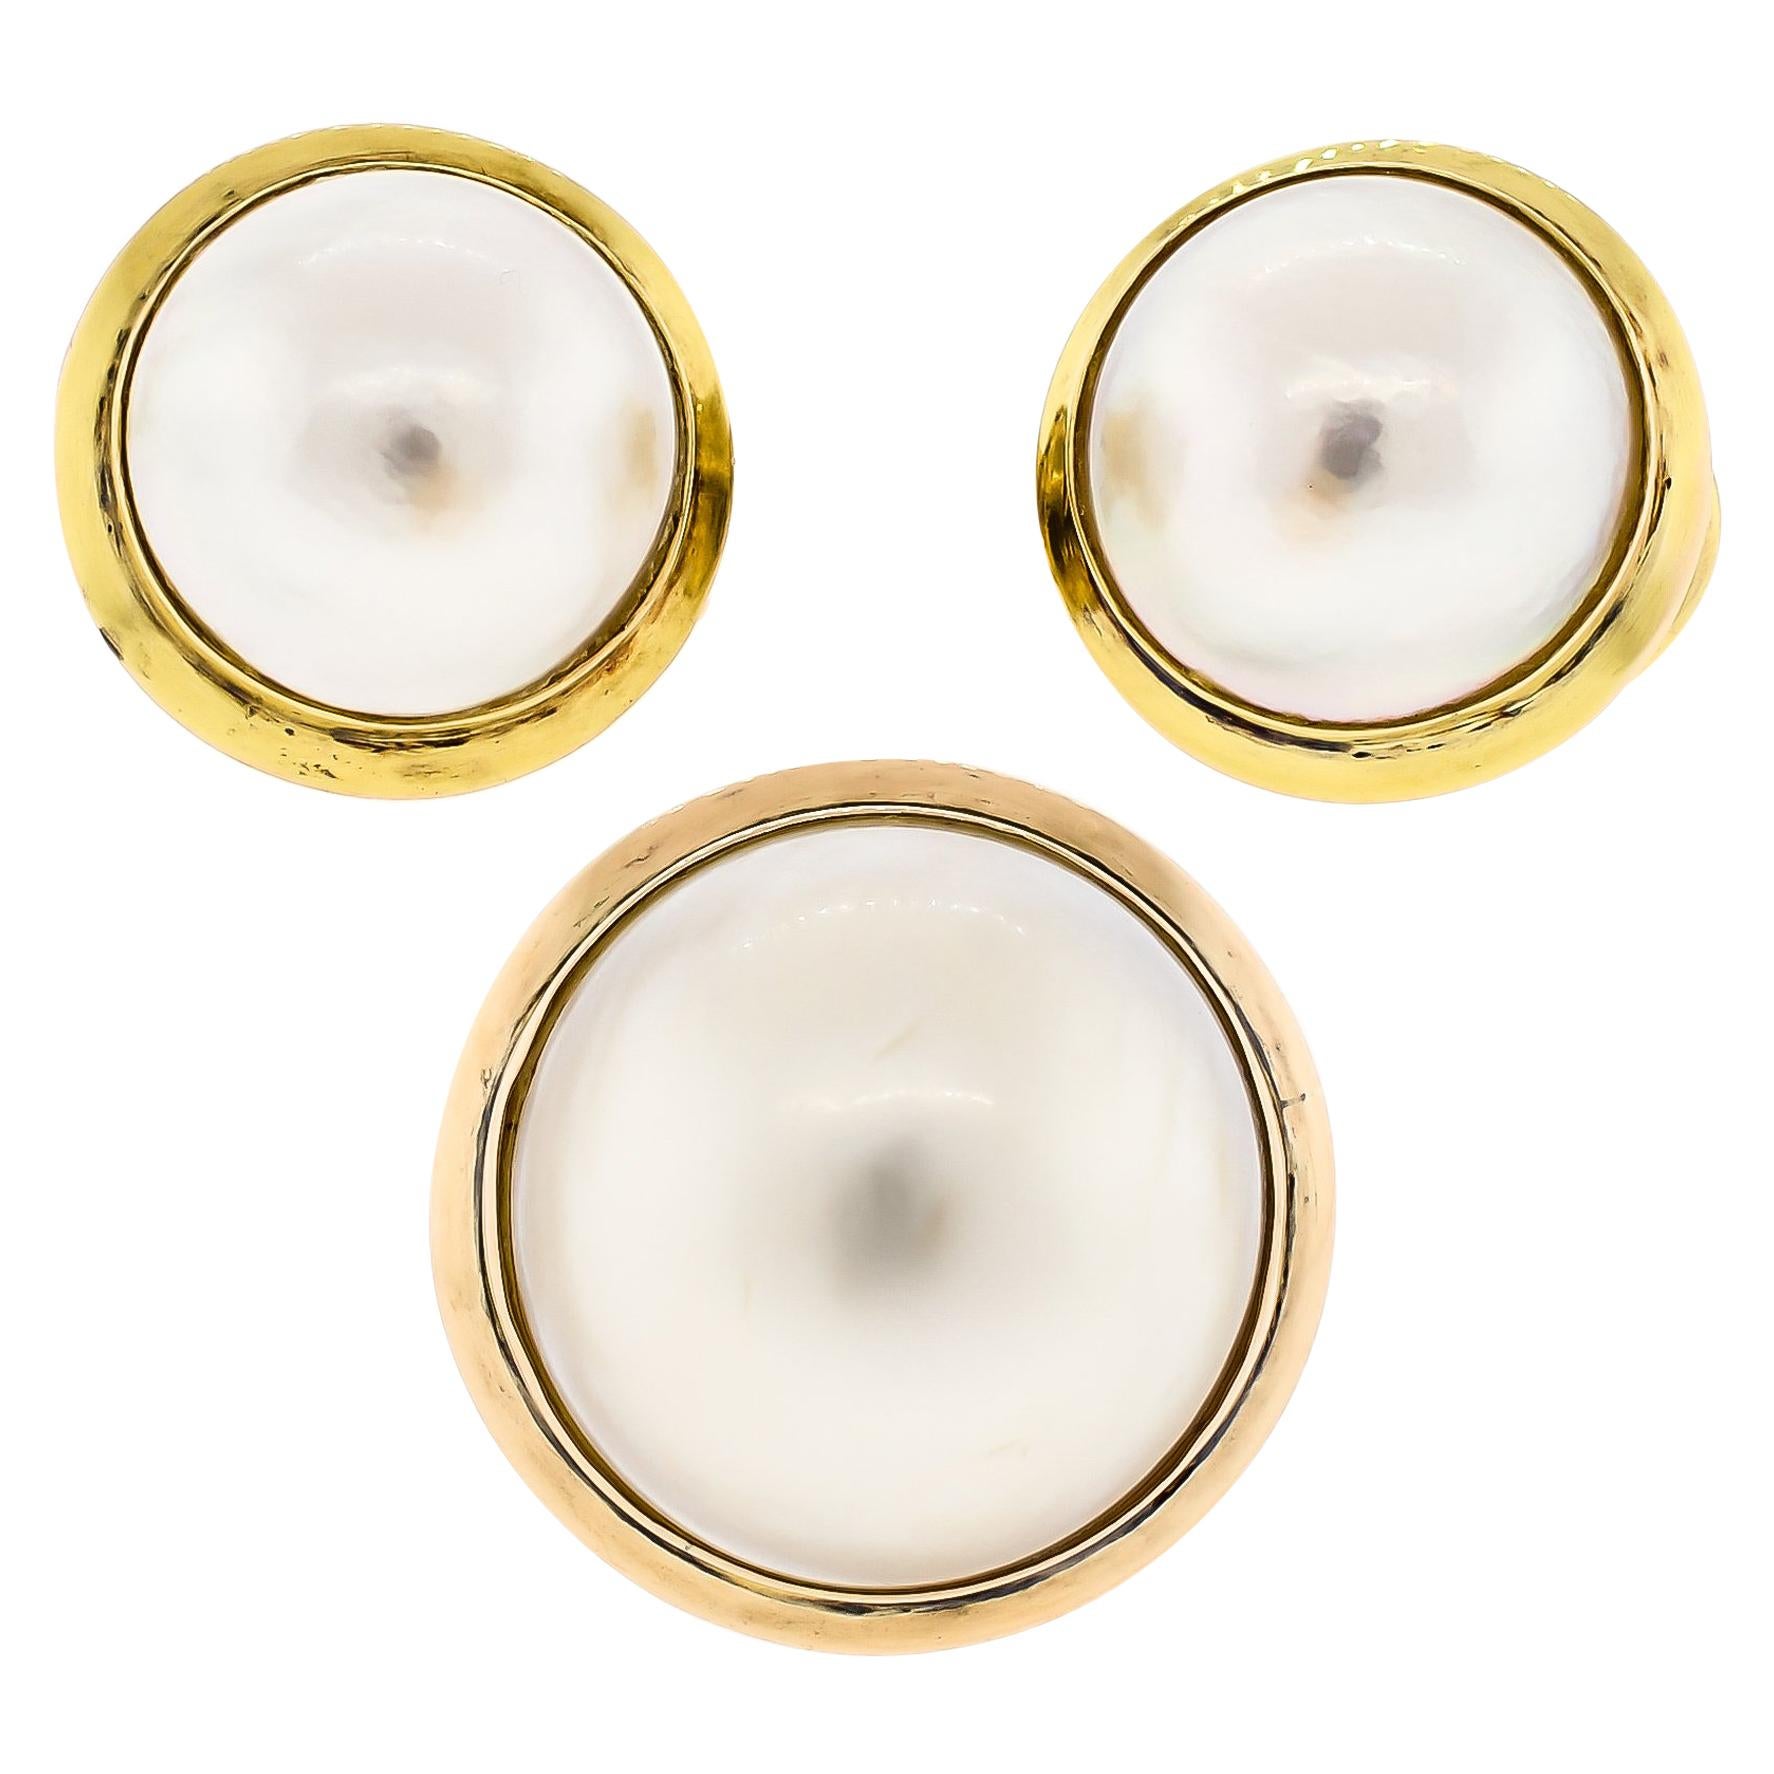 Exquisite Vintage Large Mabé Pearl and Earring Suite, 14 Karat Yellow Gold For Sale